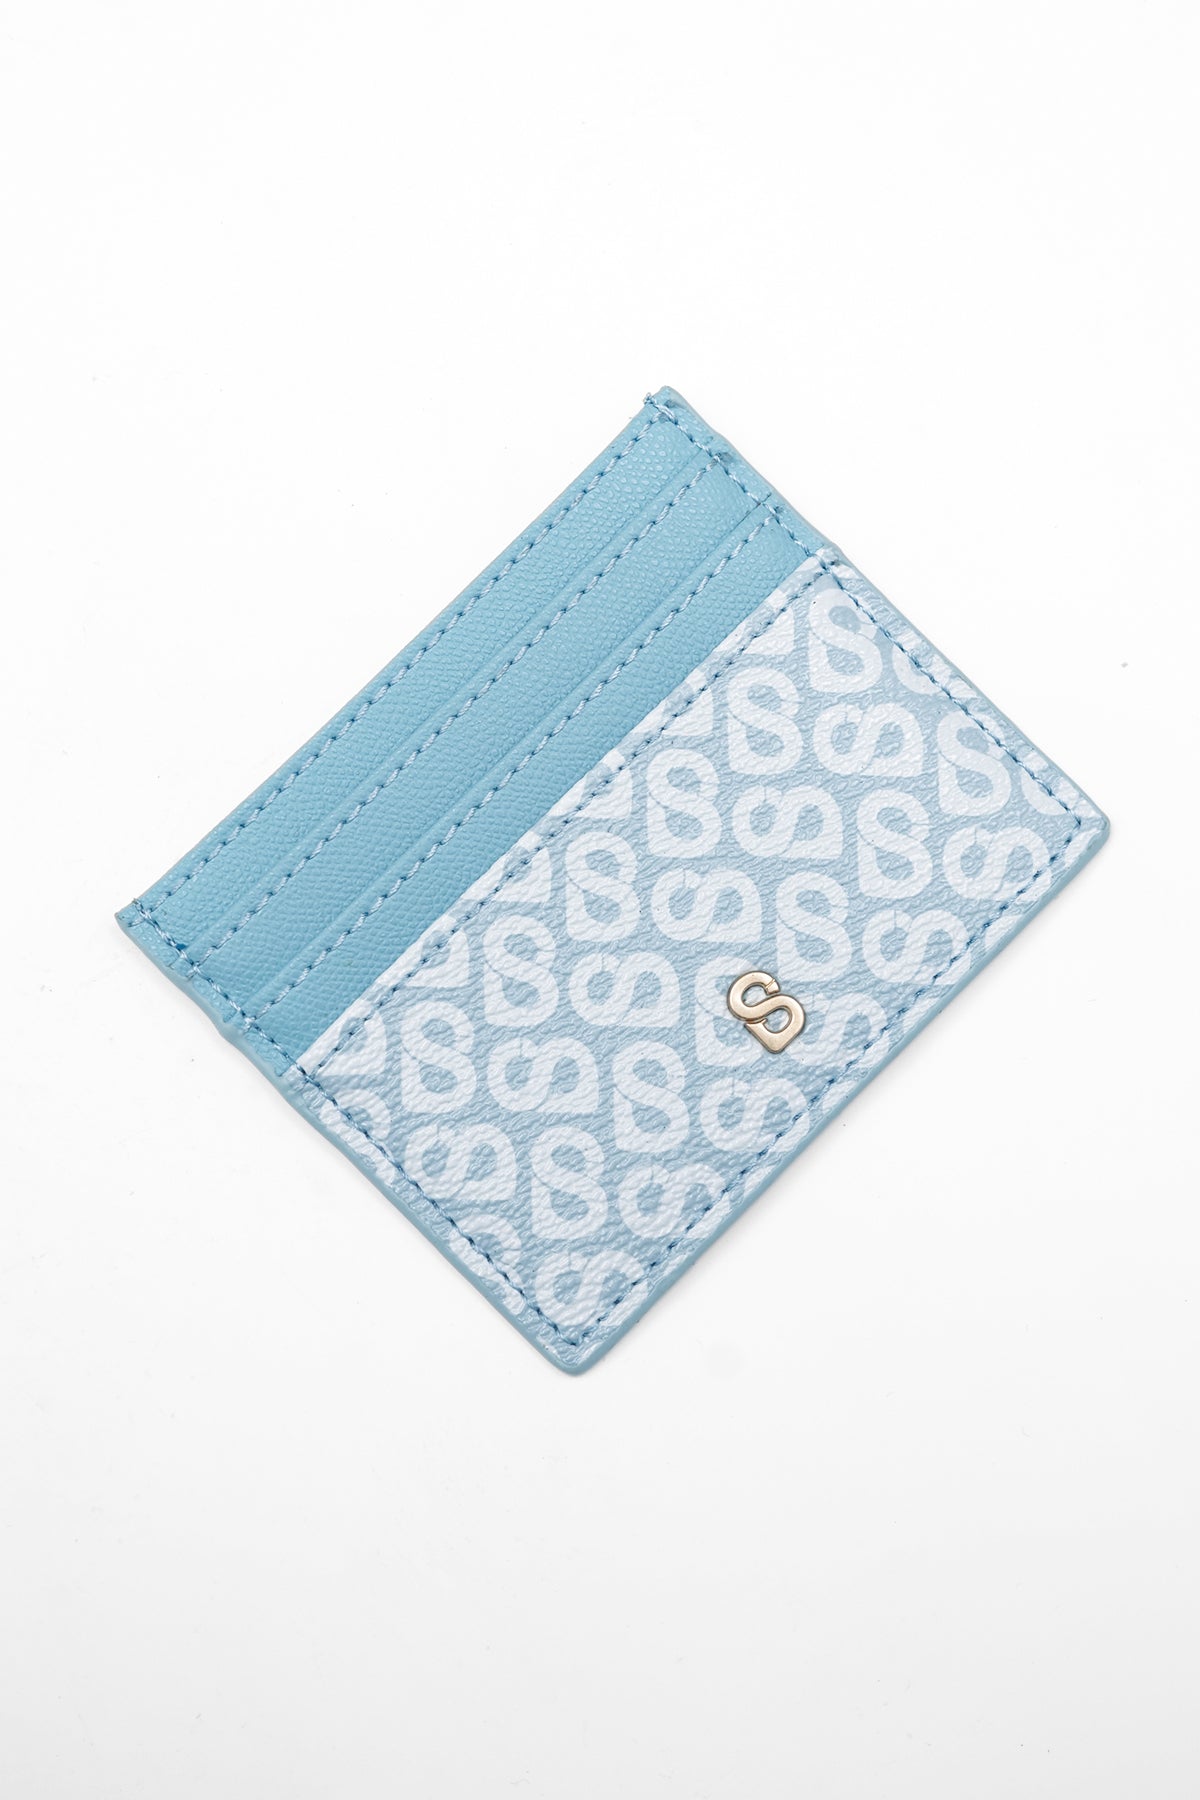 Izzy Canvas Bag in Blue by Buttonscarves